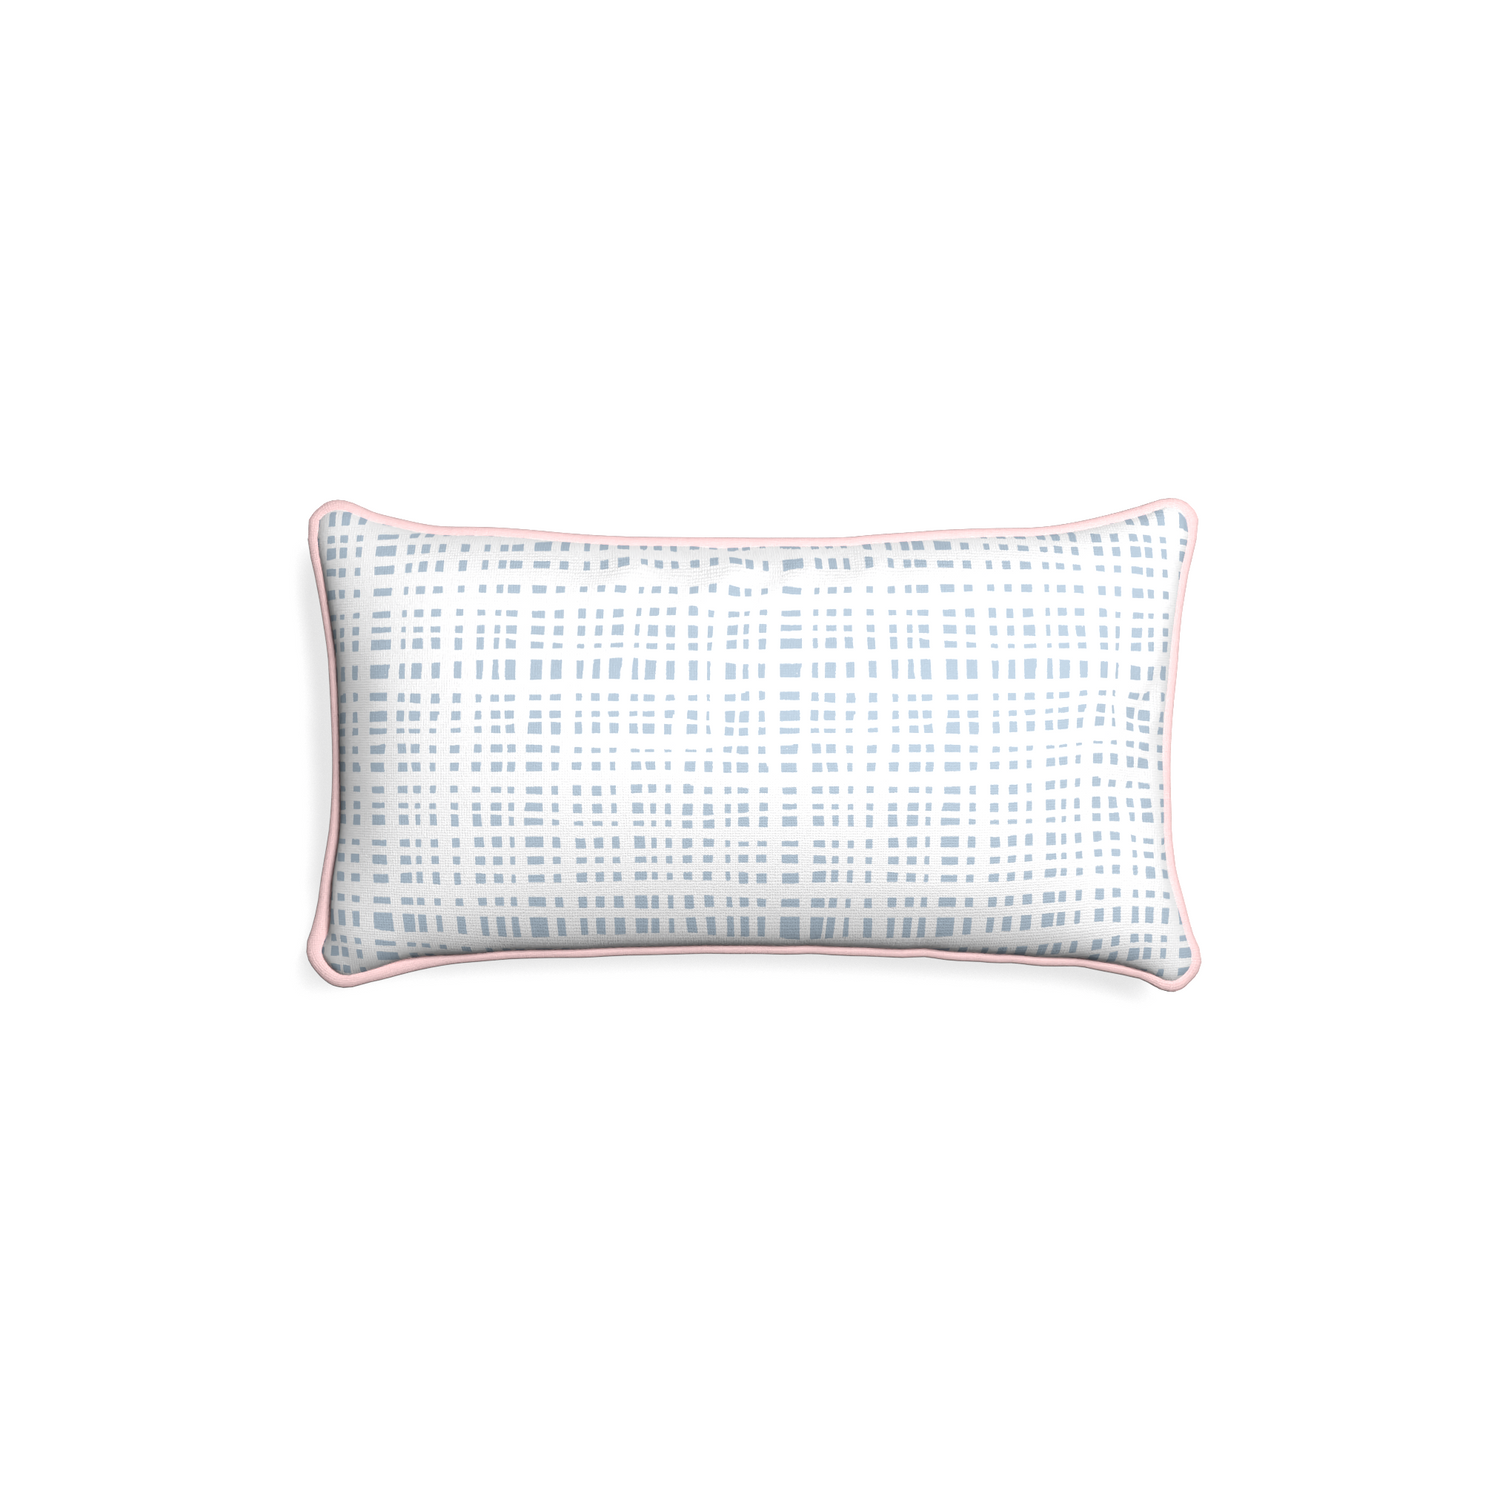 Petite-lumbar ginger sky custom plaid sky bluepillow with petal piping on white background